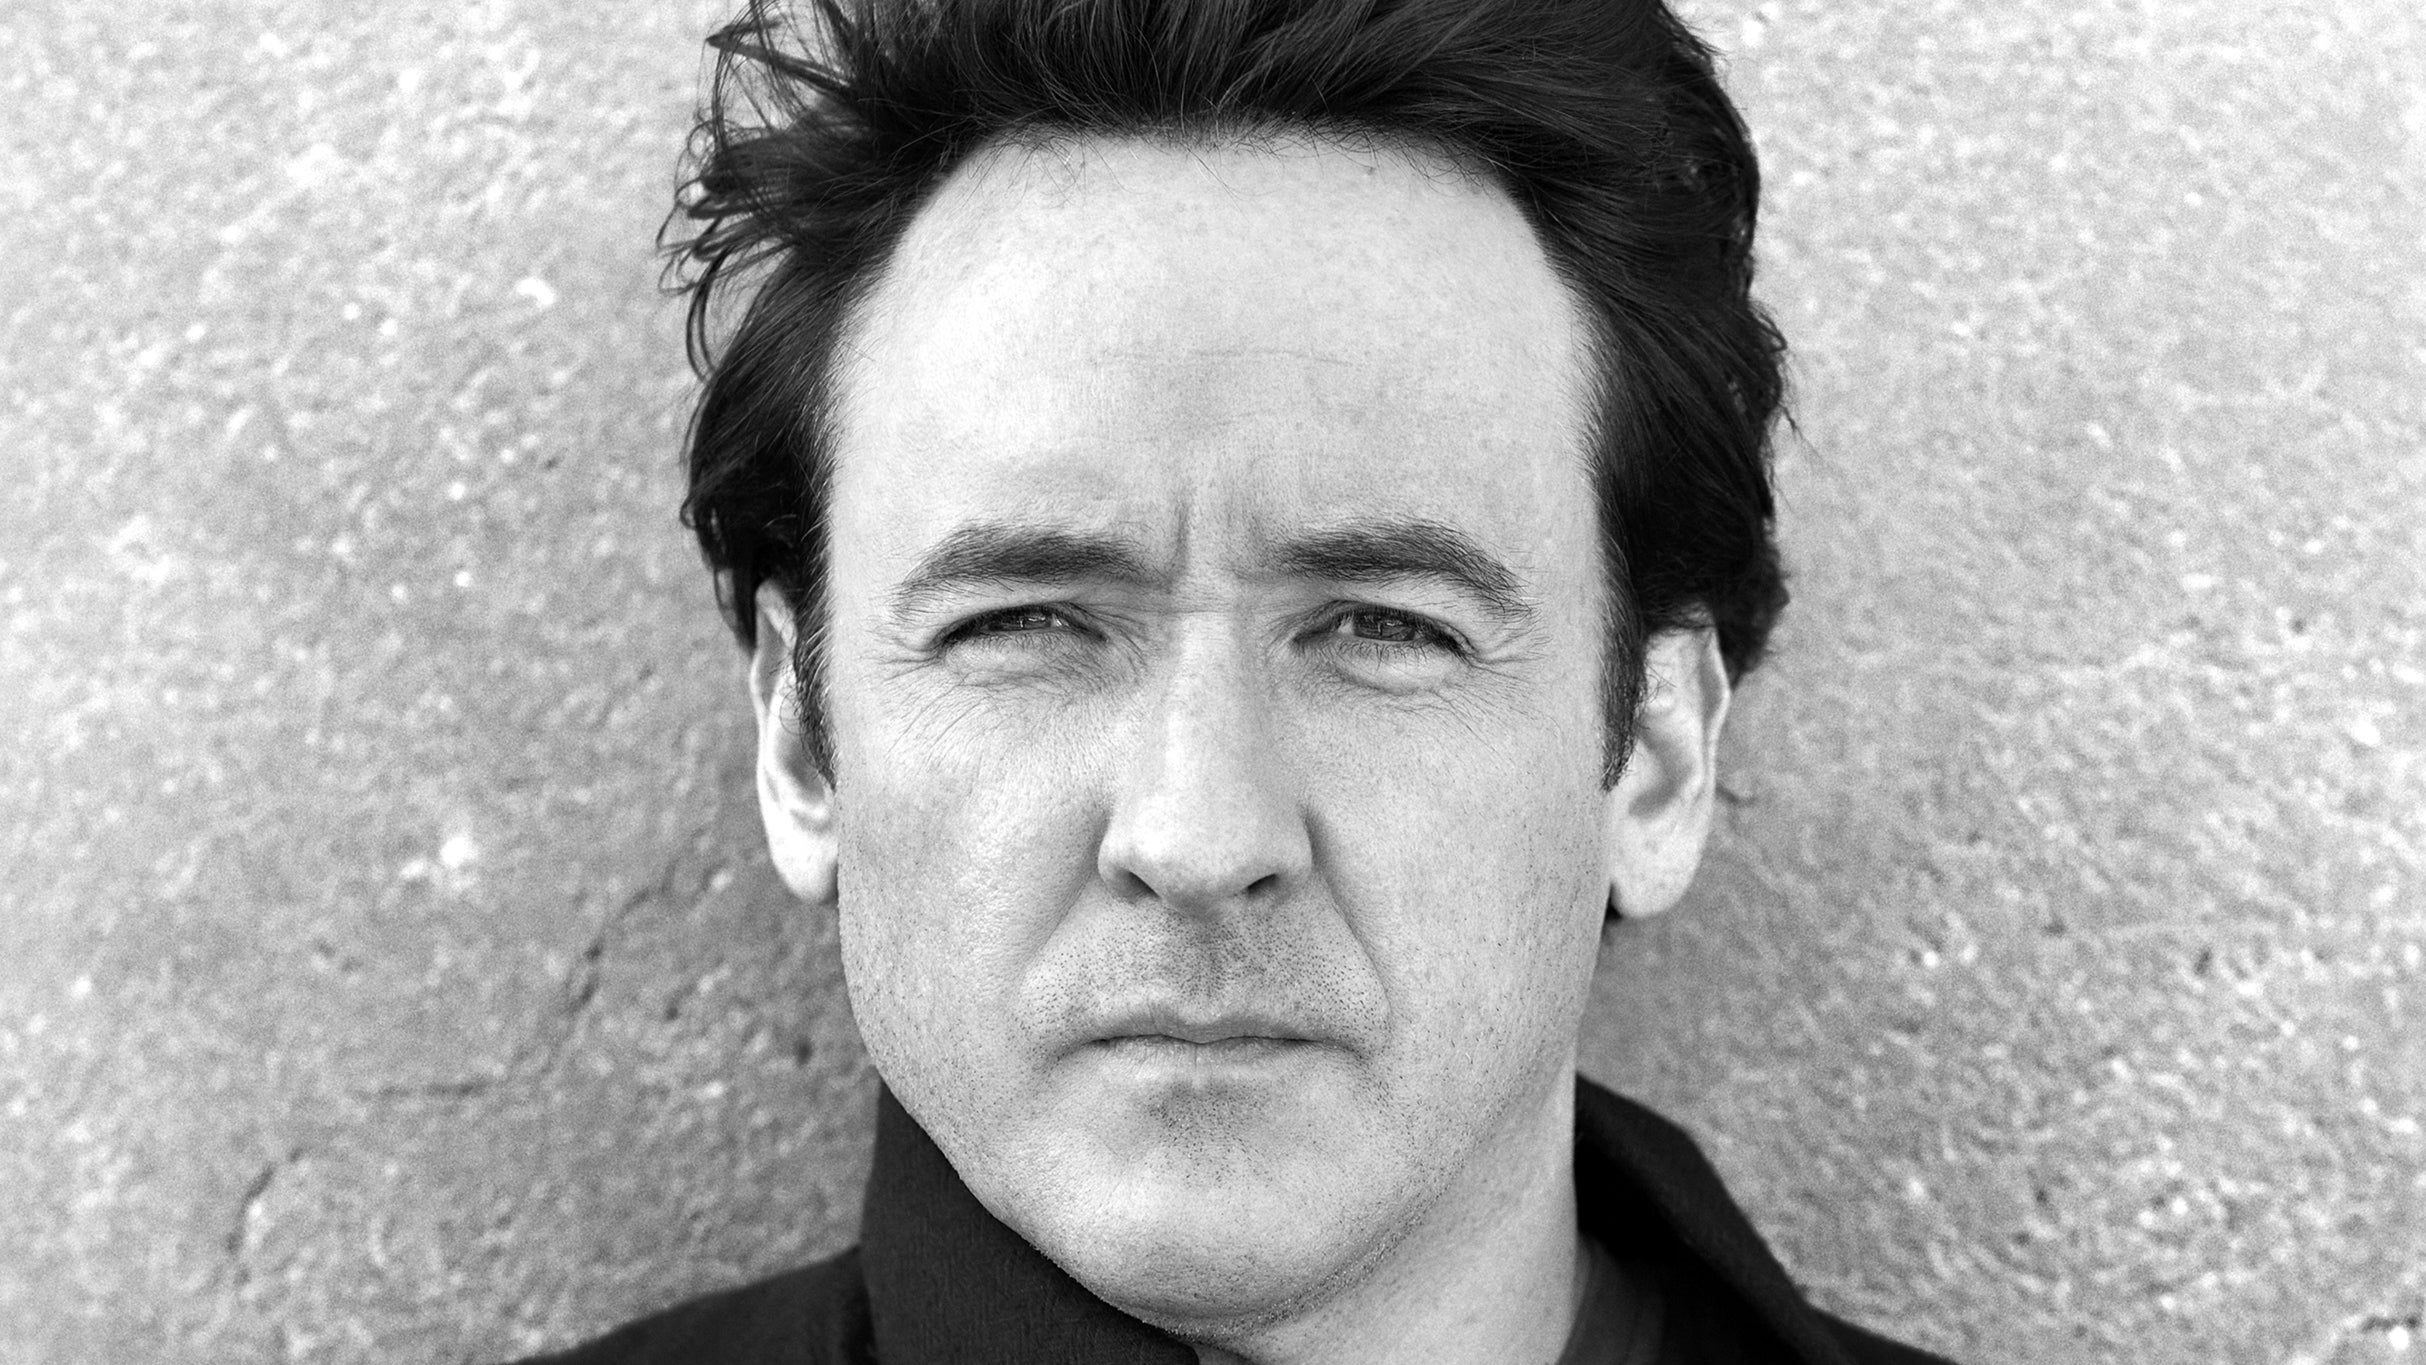 LPR Presents An Evening with John Cusack & Screening of High Fidelity